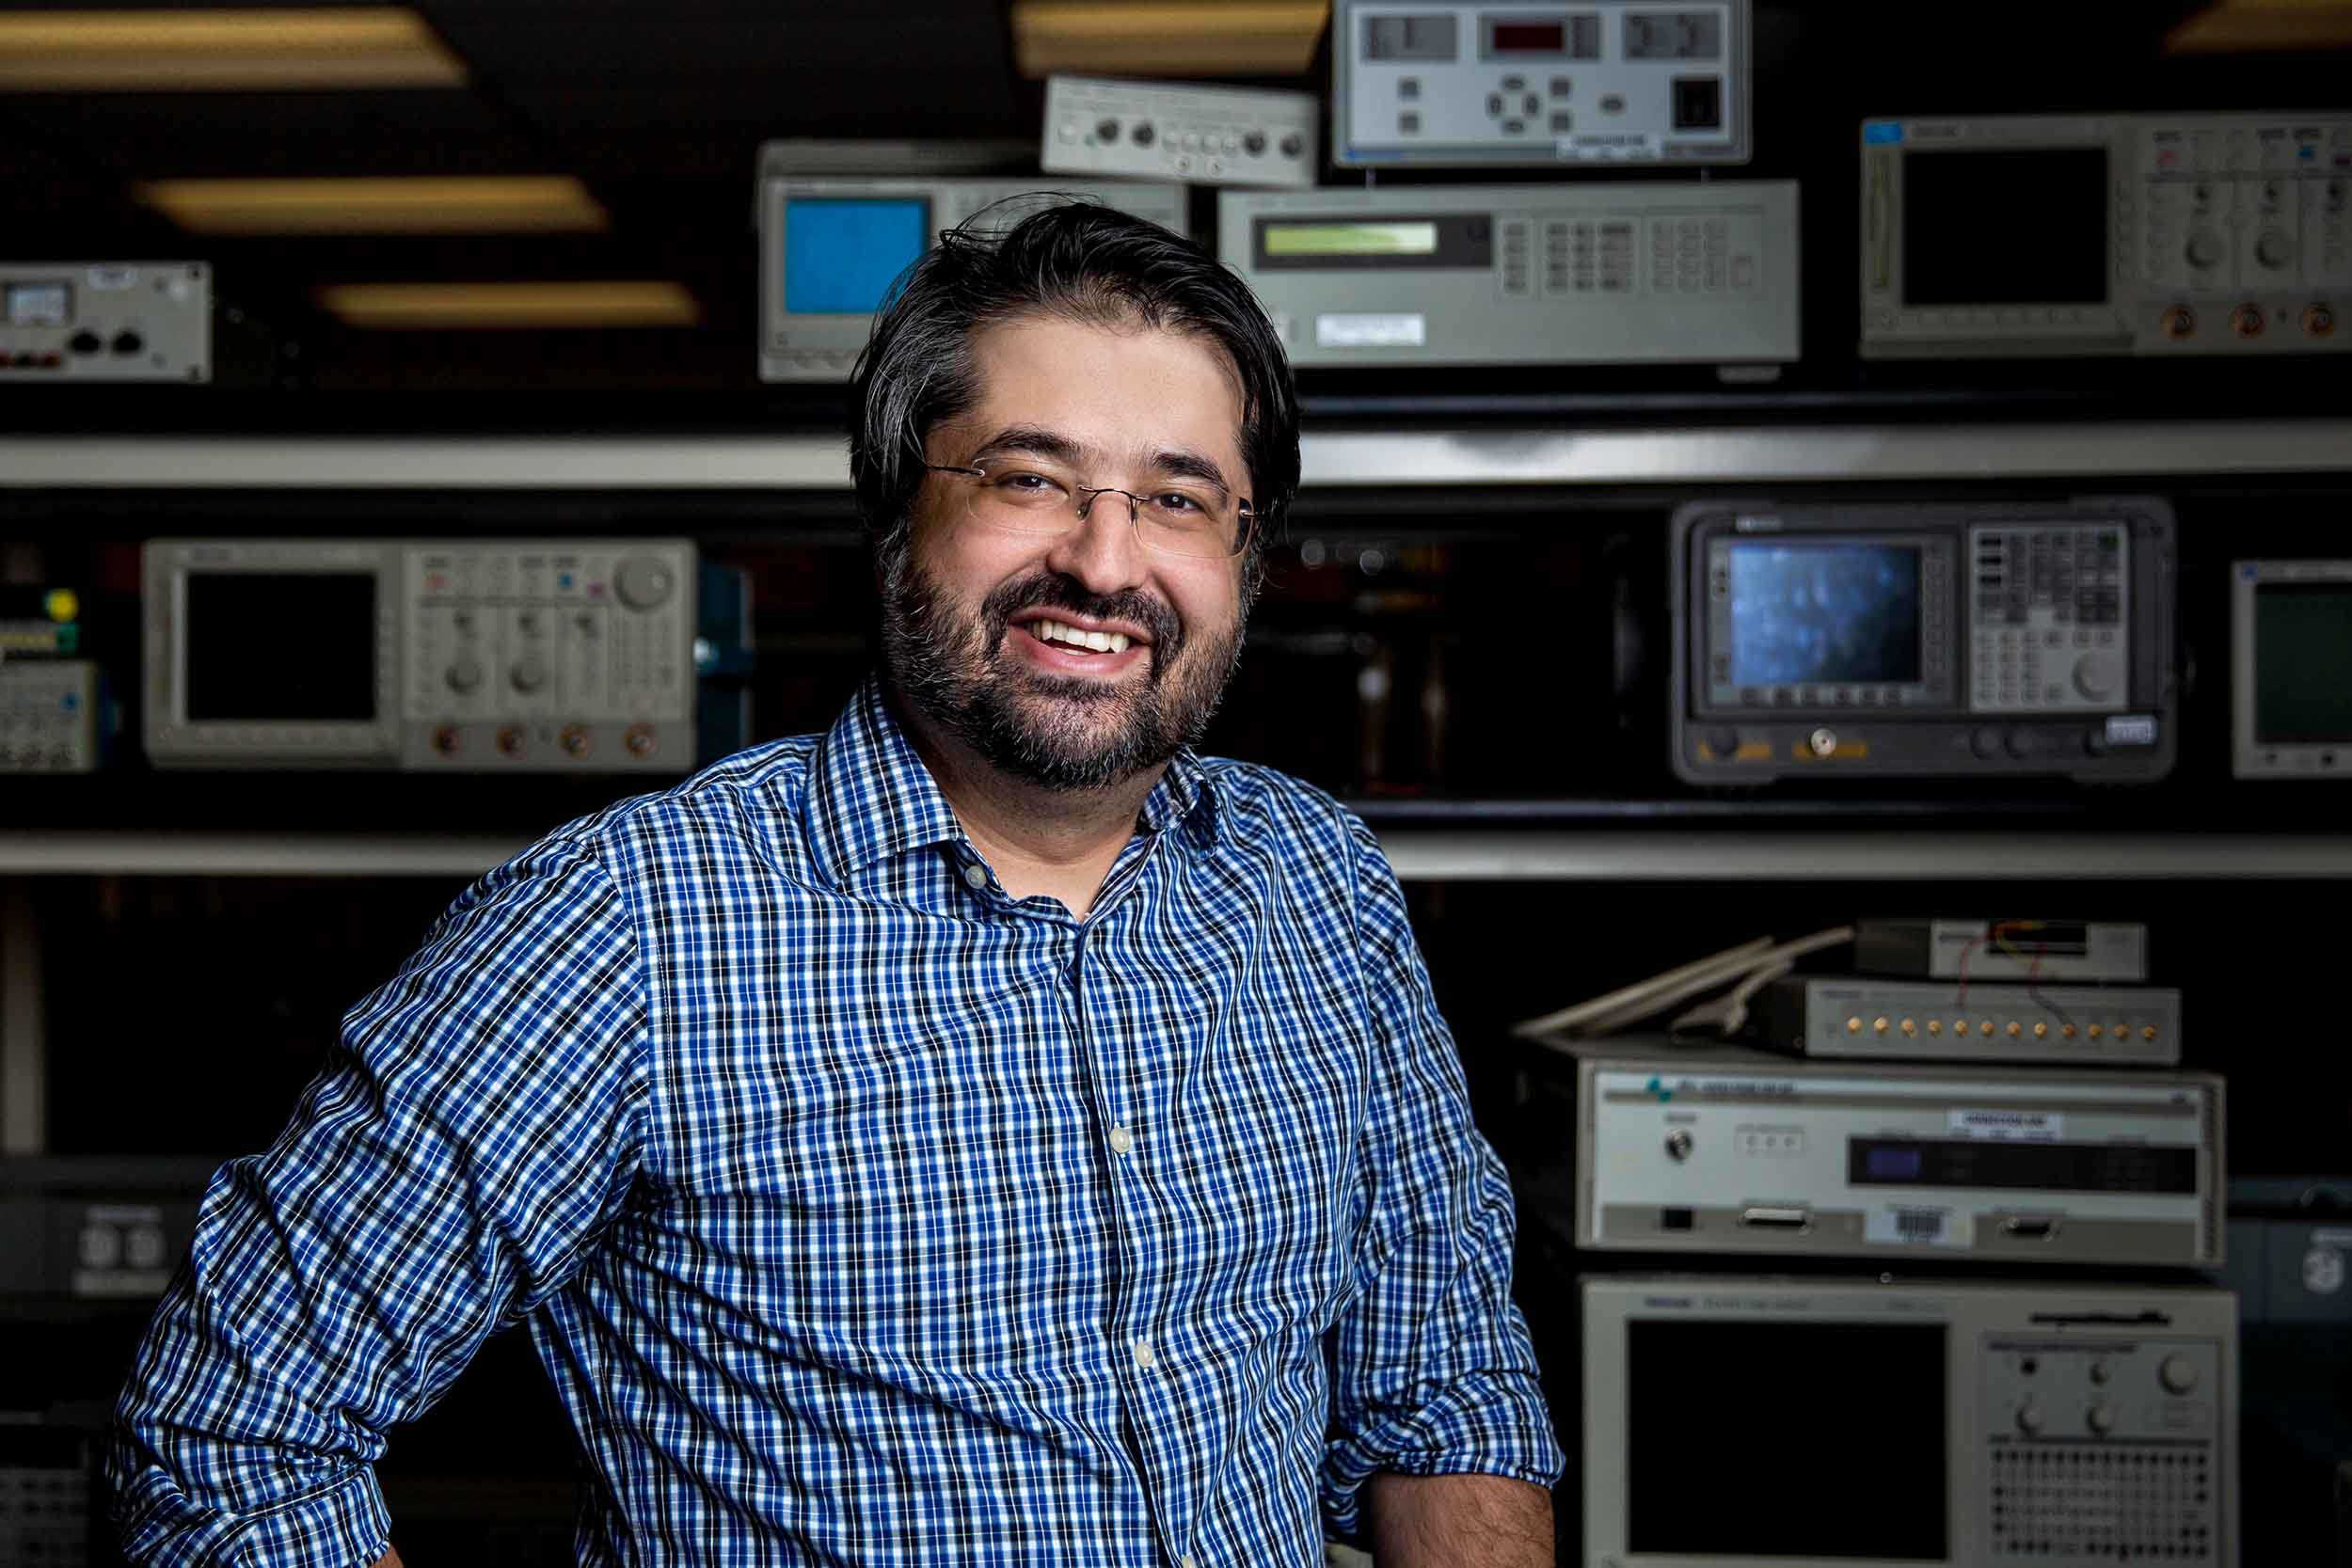 Mohammadreza Imani stands smiling warmly in his lab surrounded by electronics